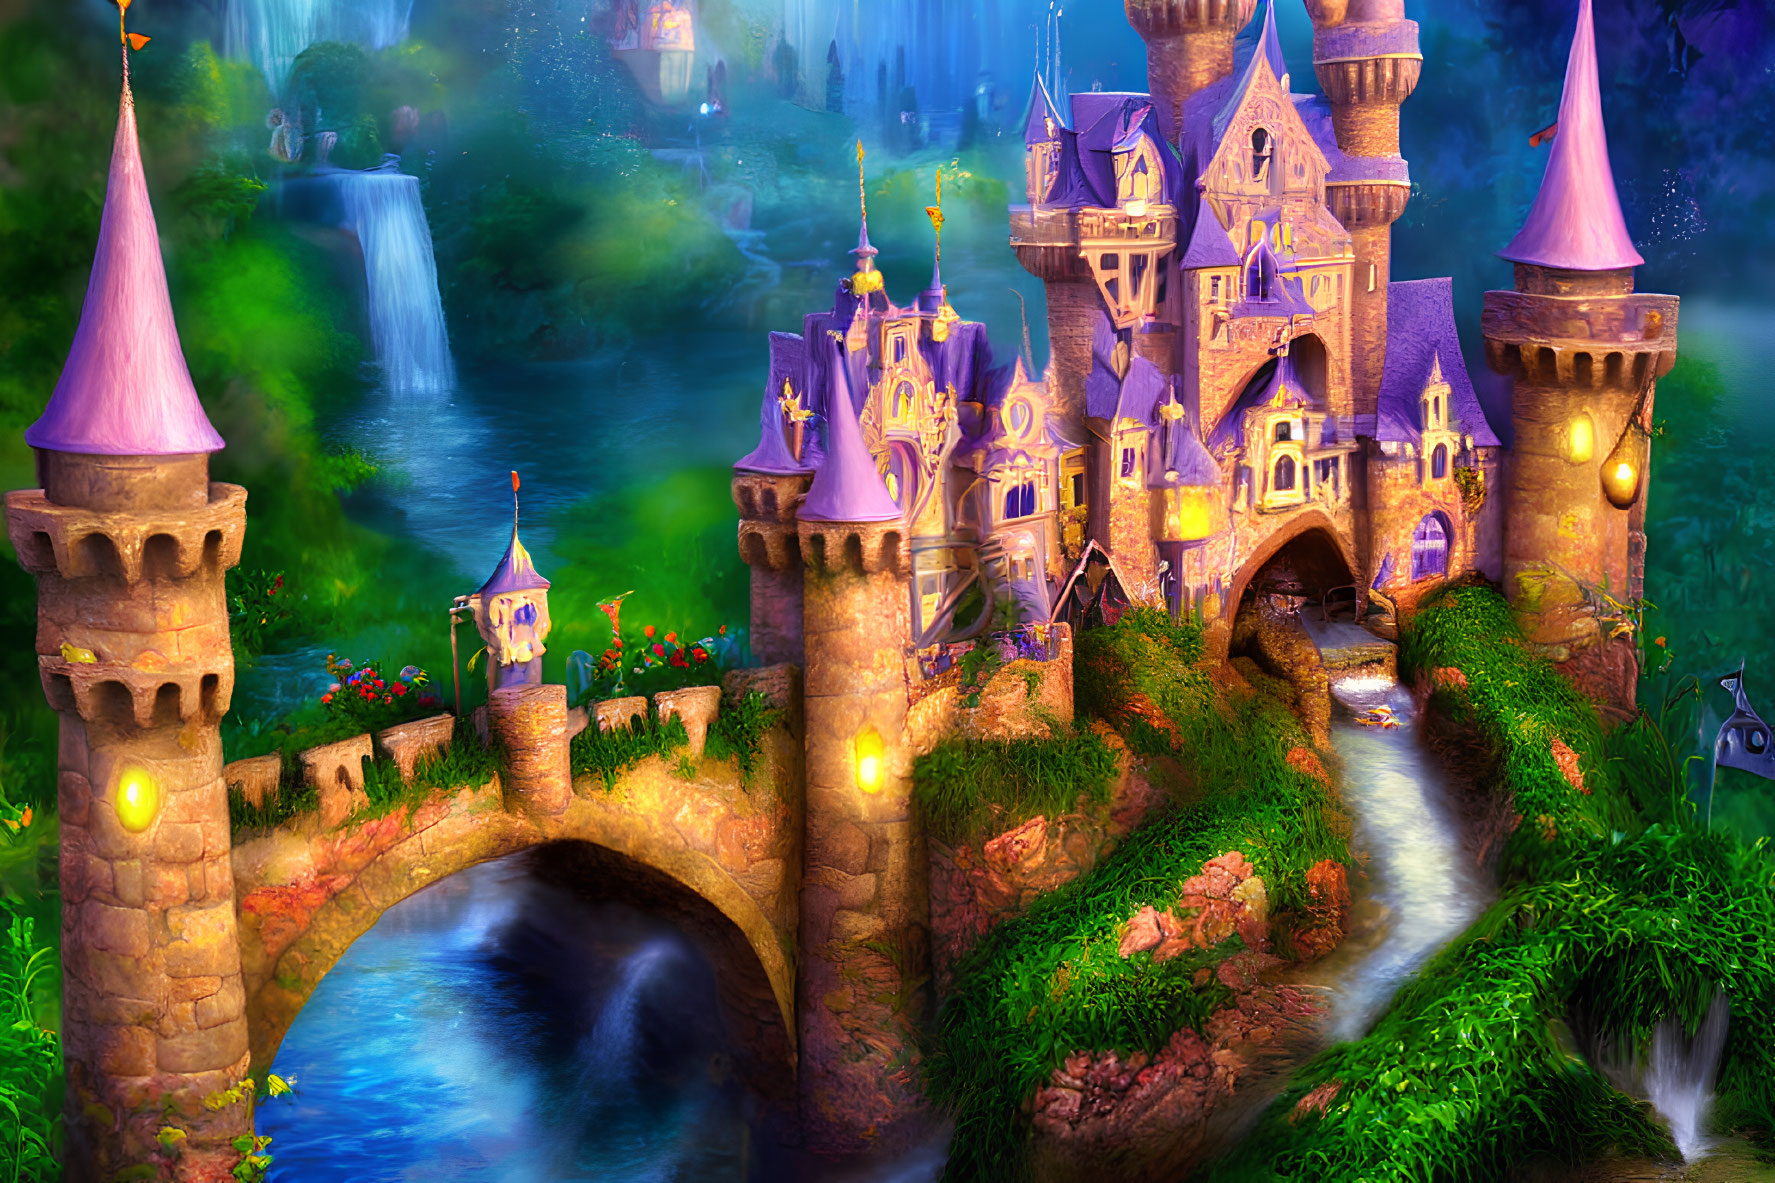 Enchanted castle with spires and turrets in lush forest